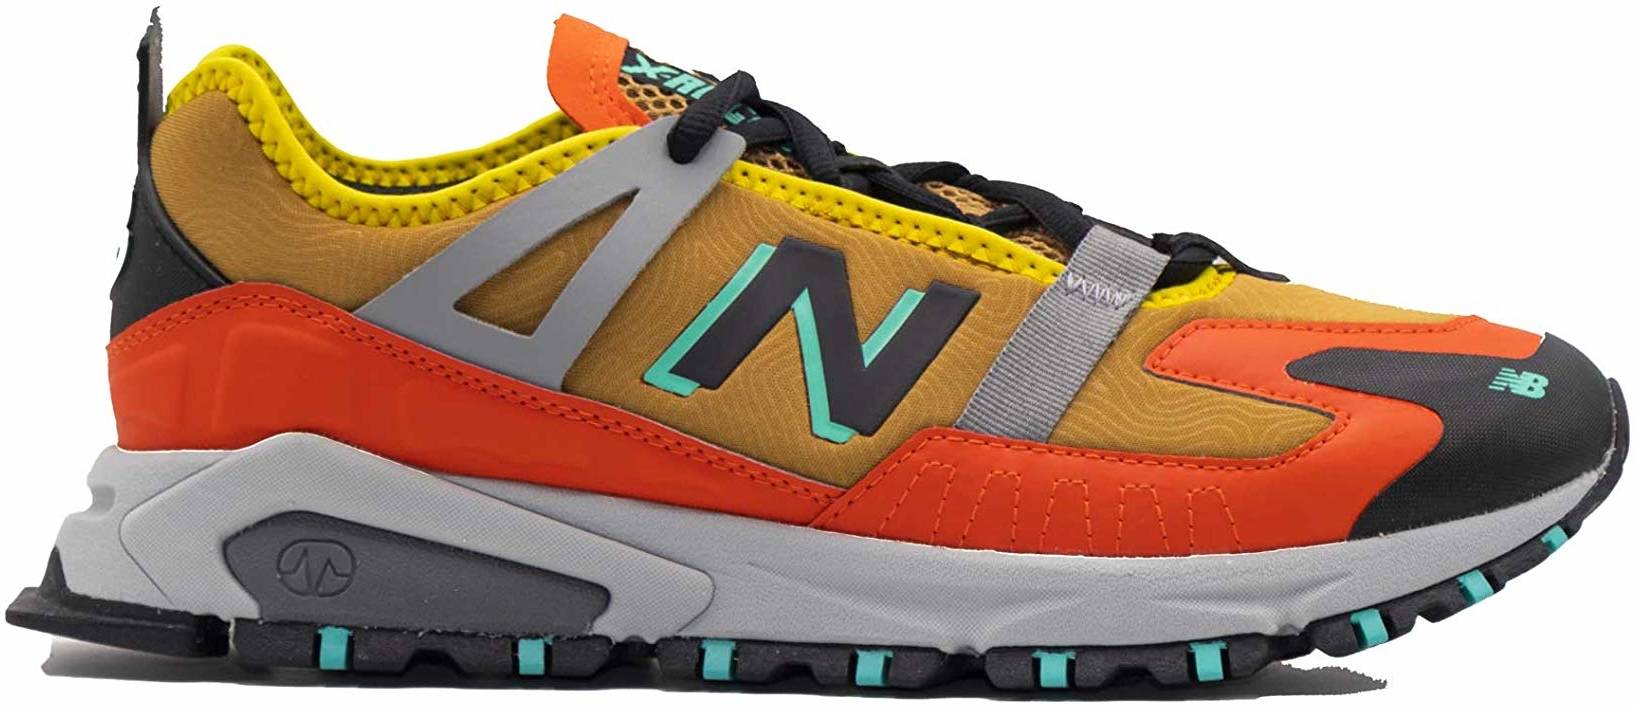 New Balance XRCT sneakers in orange (only £110) | RunRepeat